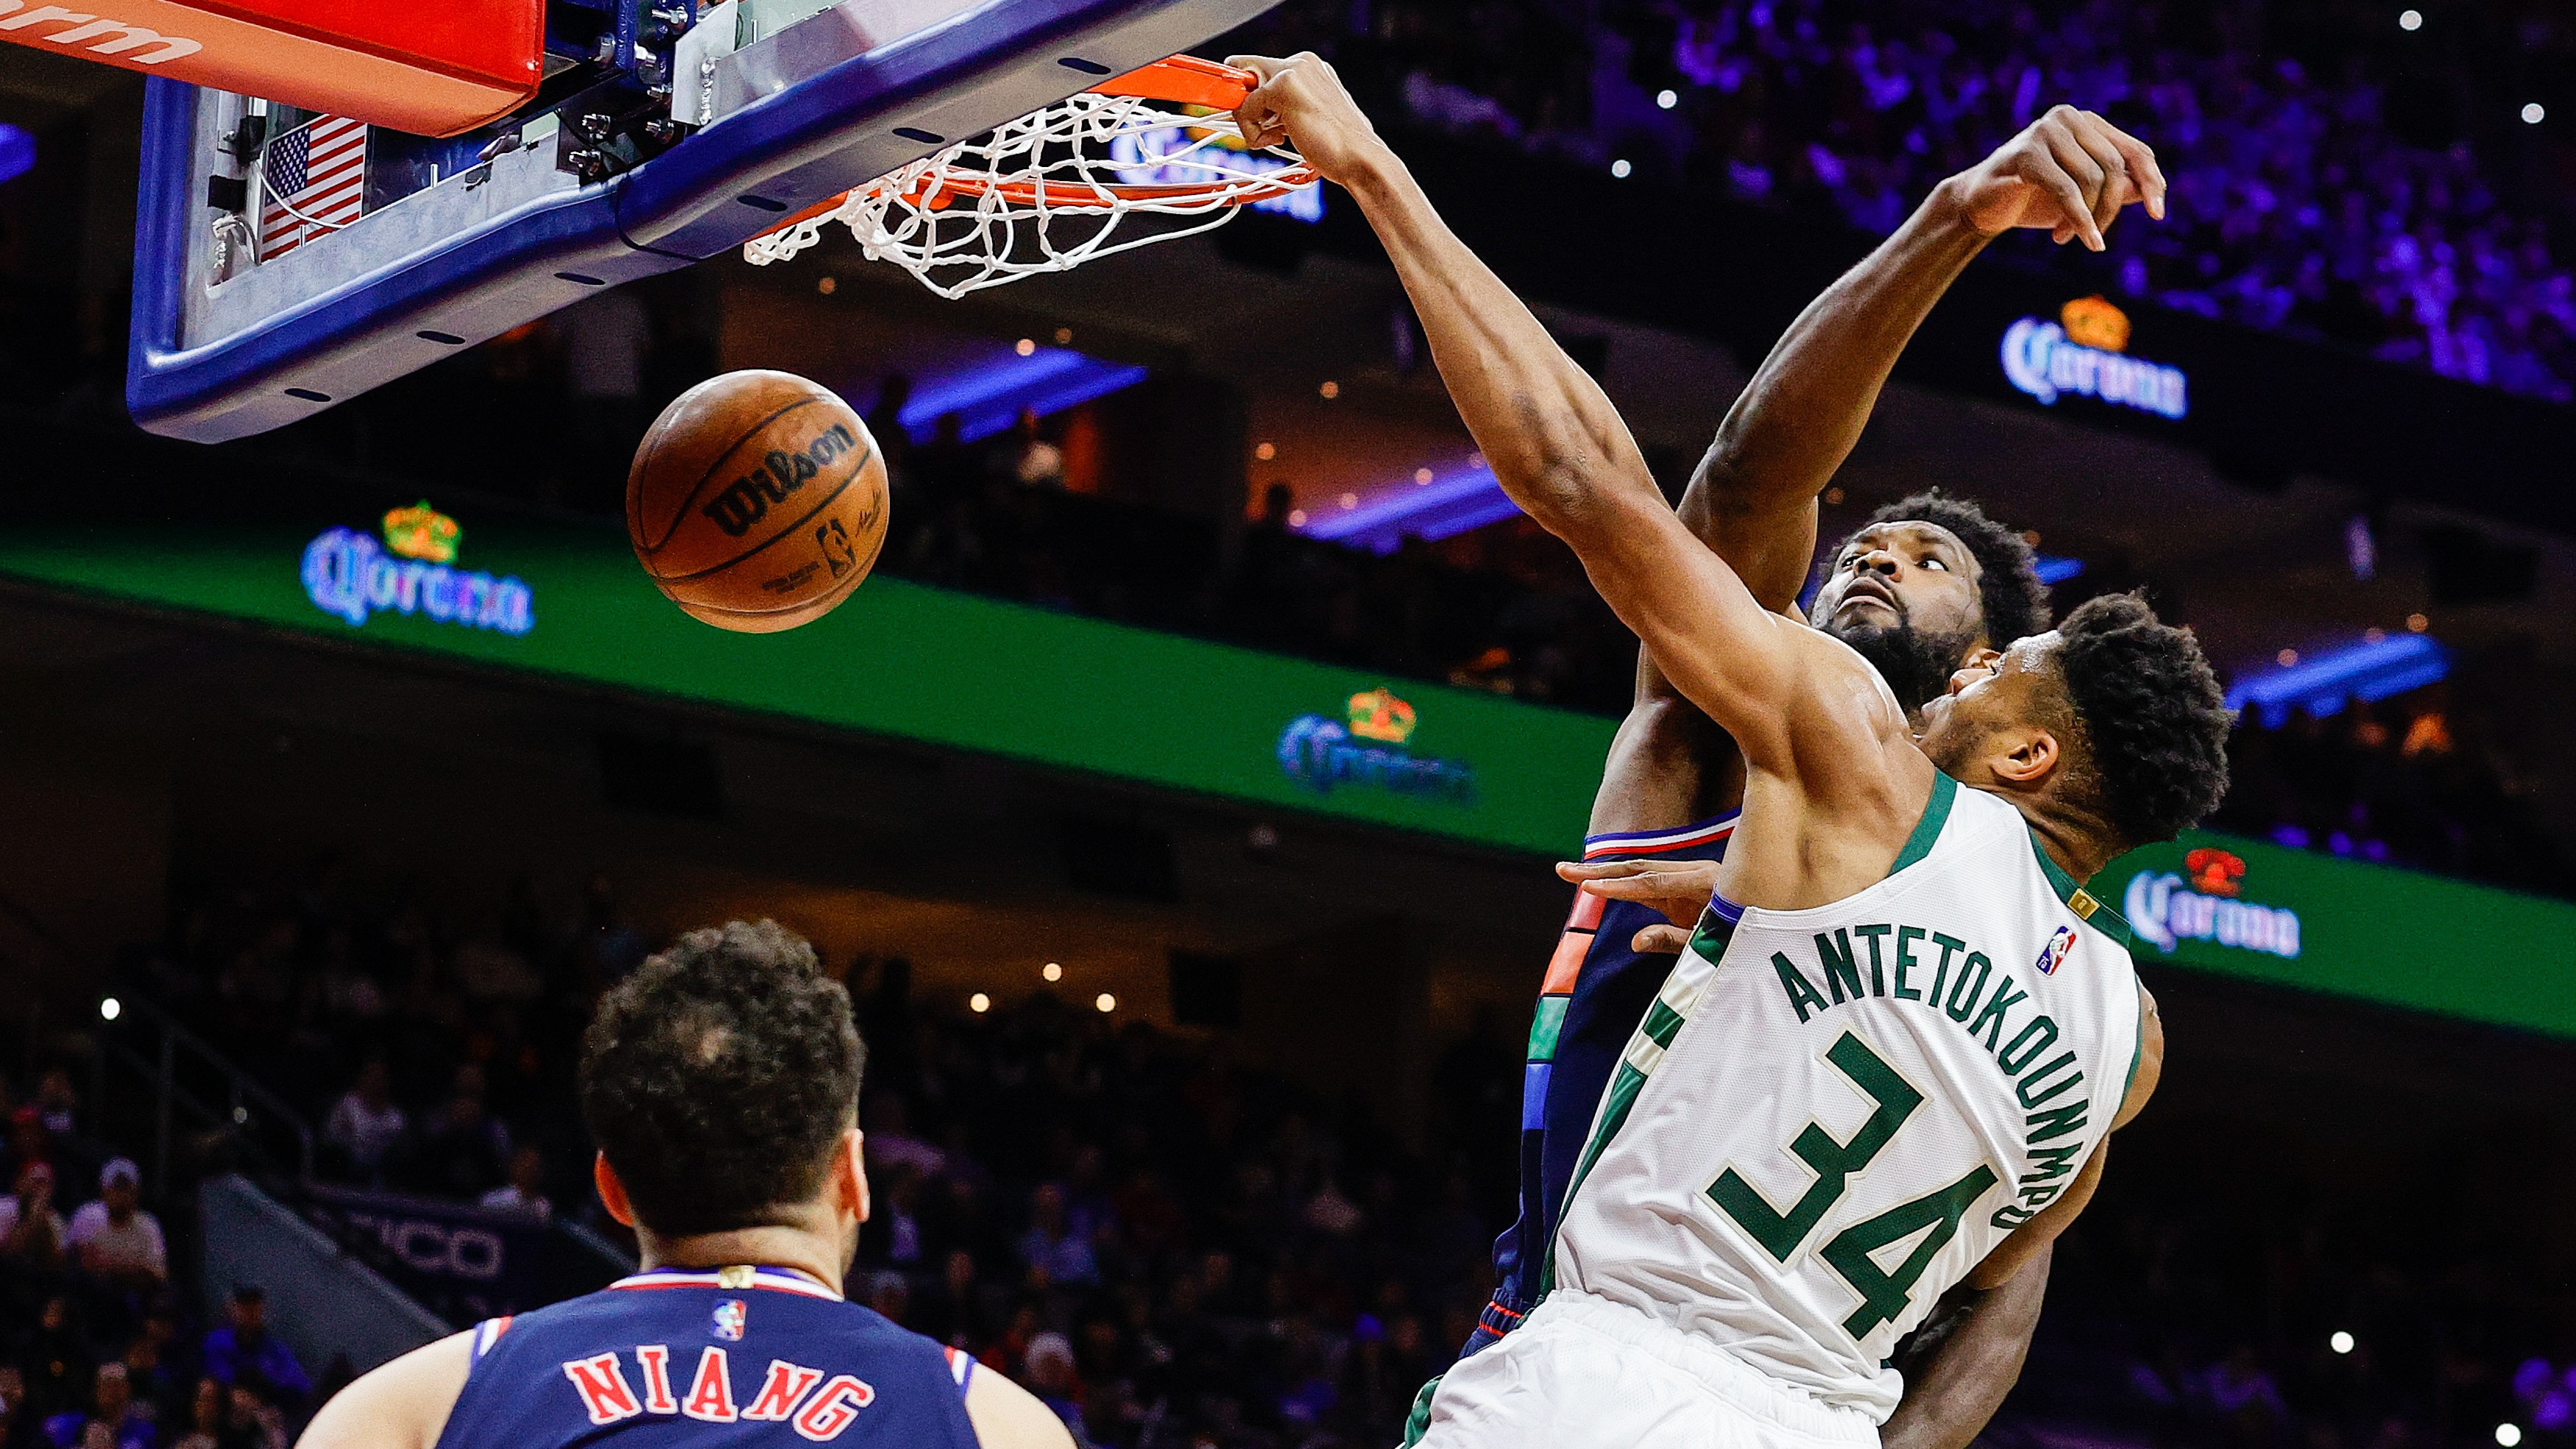 Slideshow-image: Joel Embiid #21 of the Philadelphia 76ers guards as Giannis Antetokounmpo #34 of the Milwaukee Bucks dunks during the first quarter at Wells Fargo ...